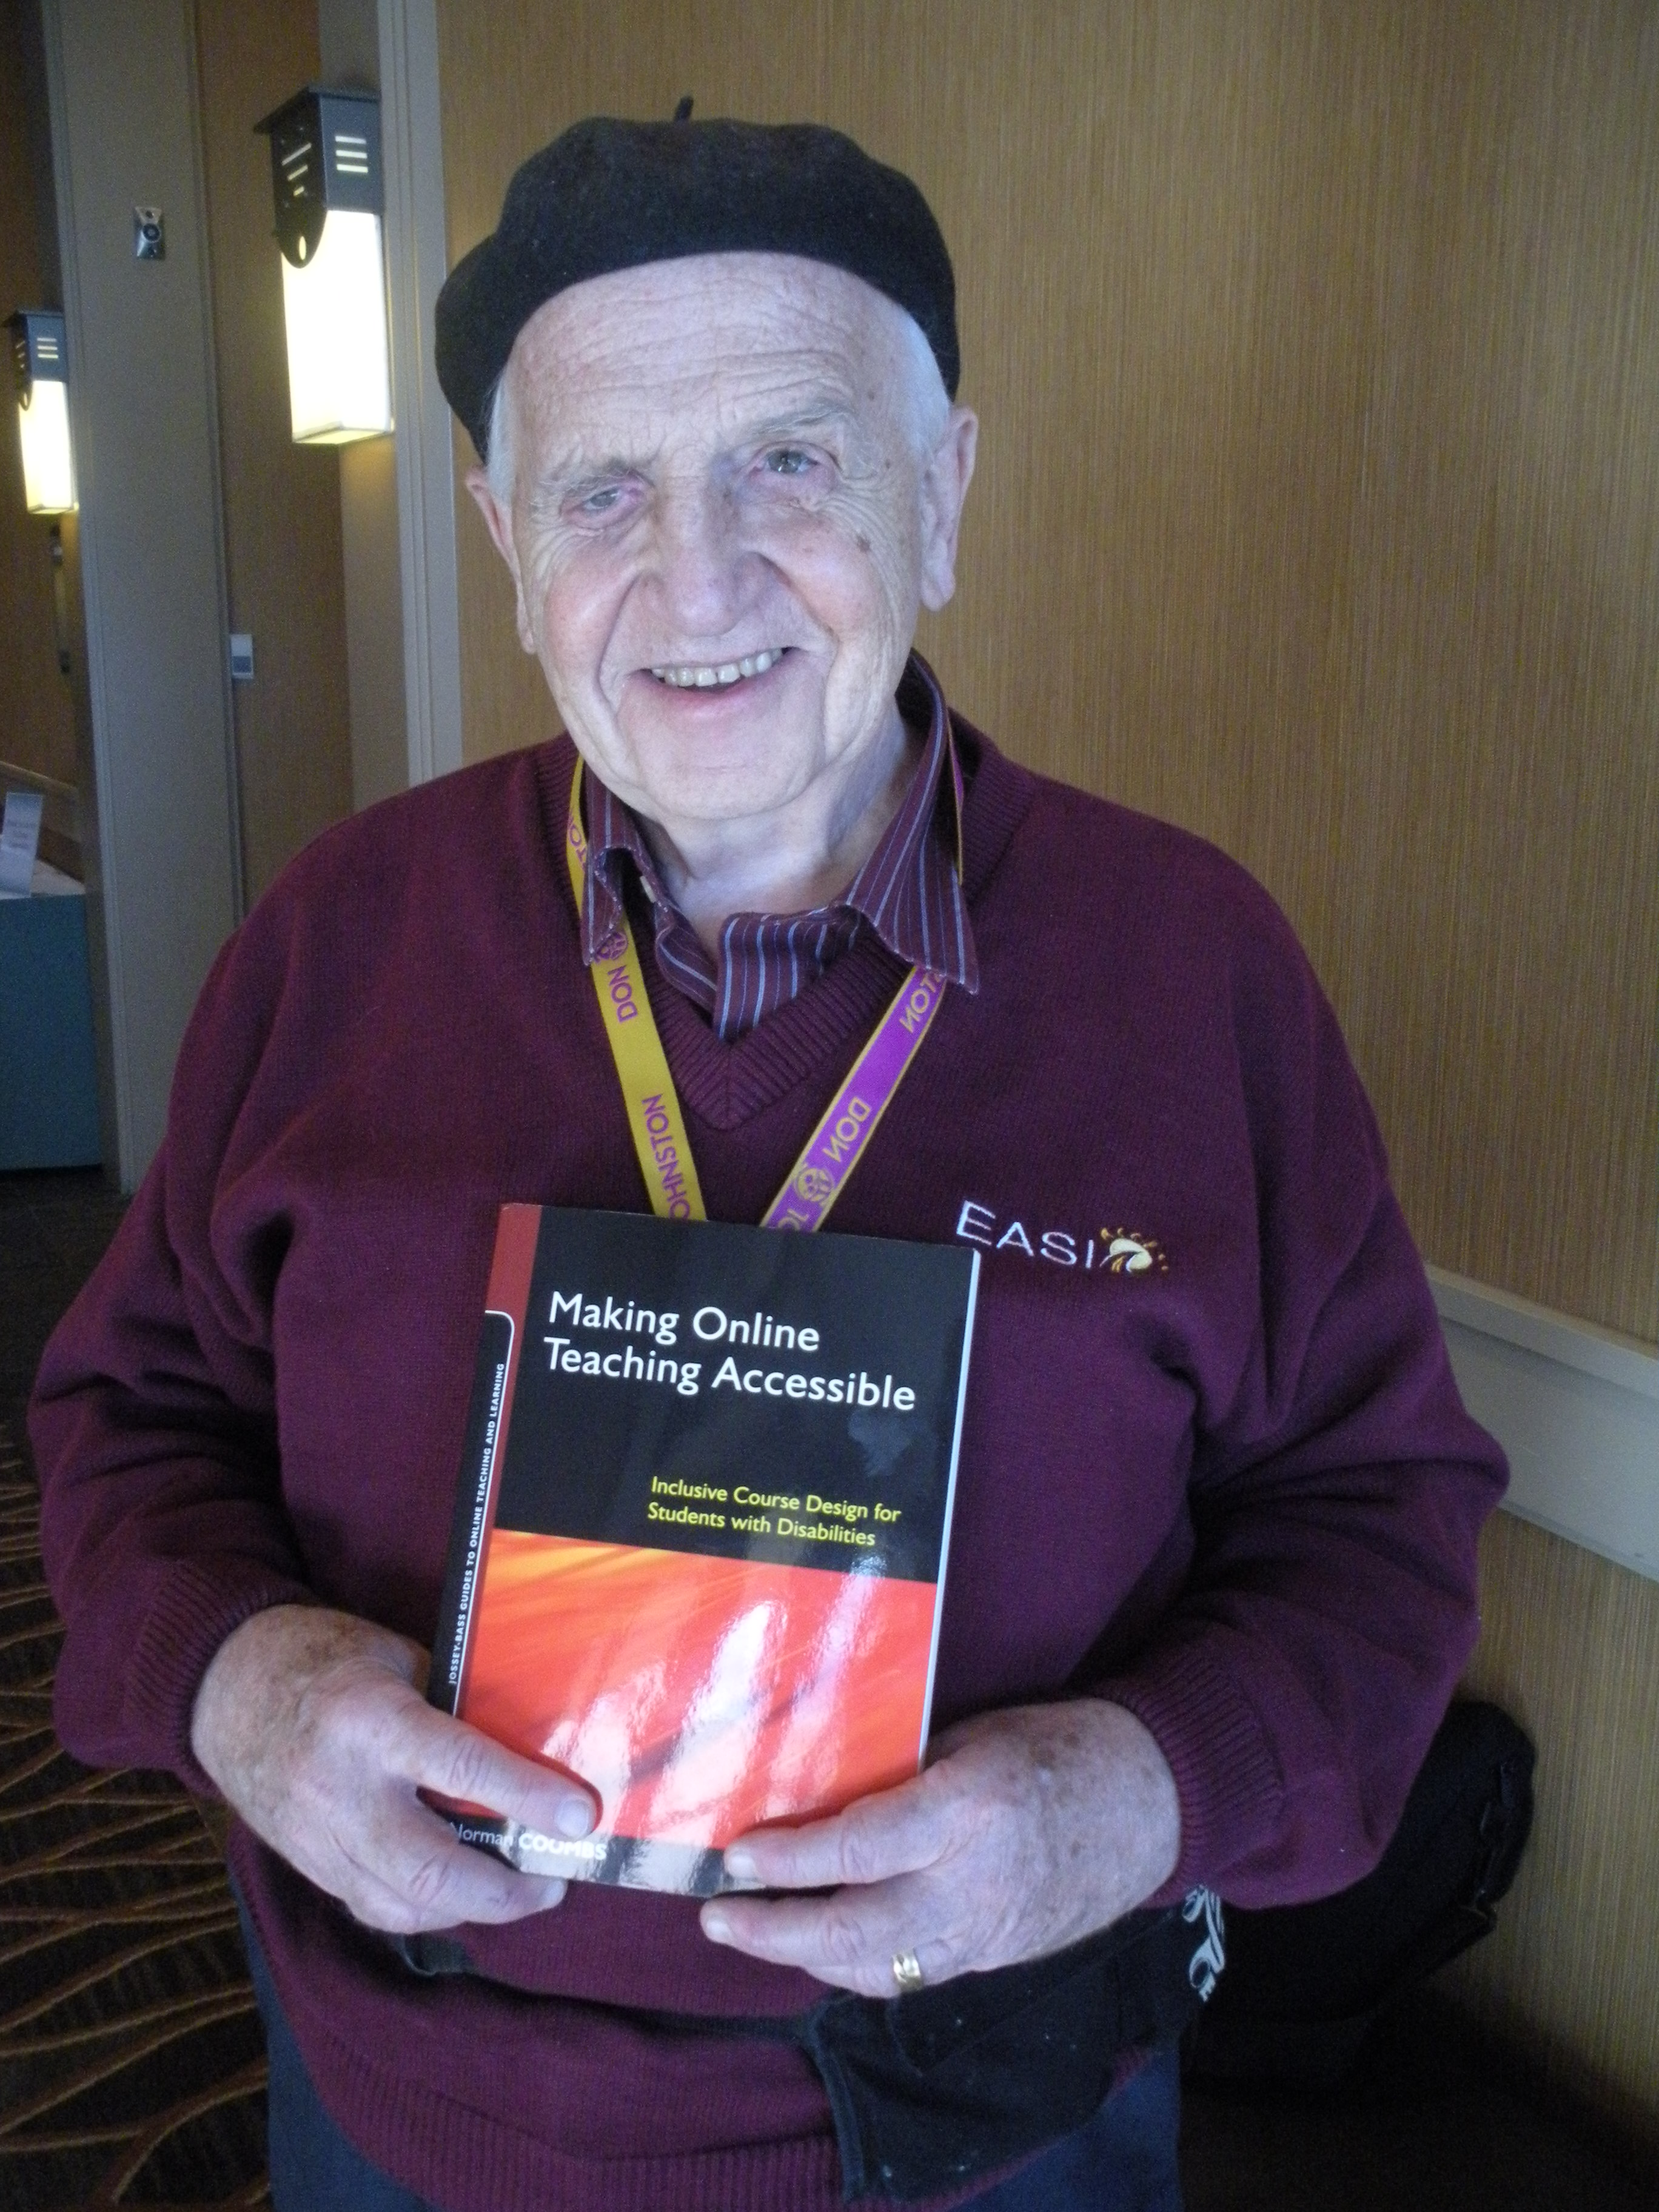 Dr. Coombs holding his new book, 'Making Online Teaching Accessible'